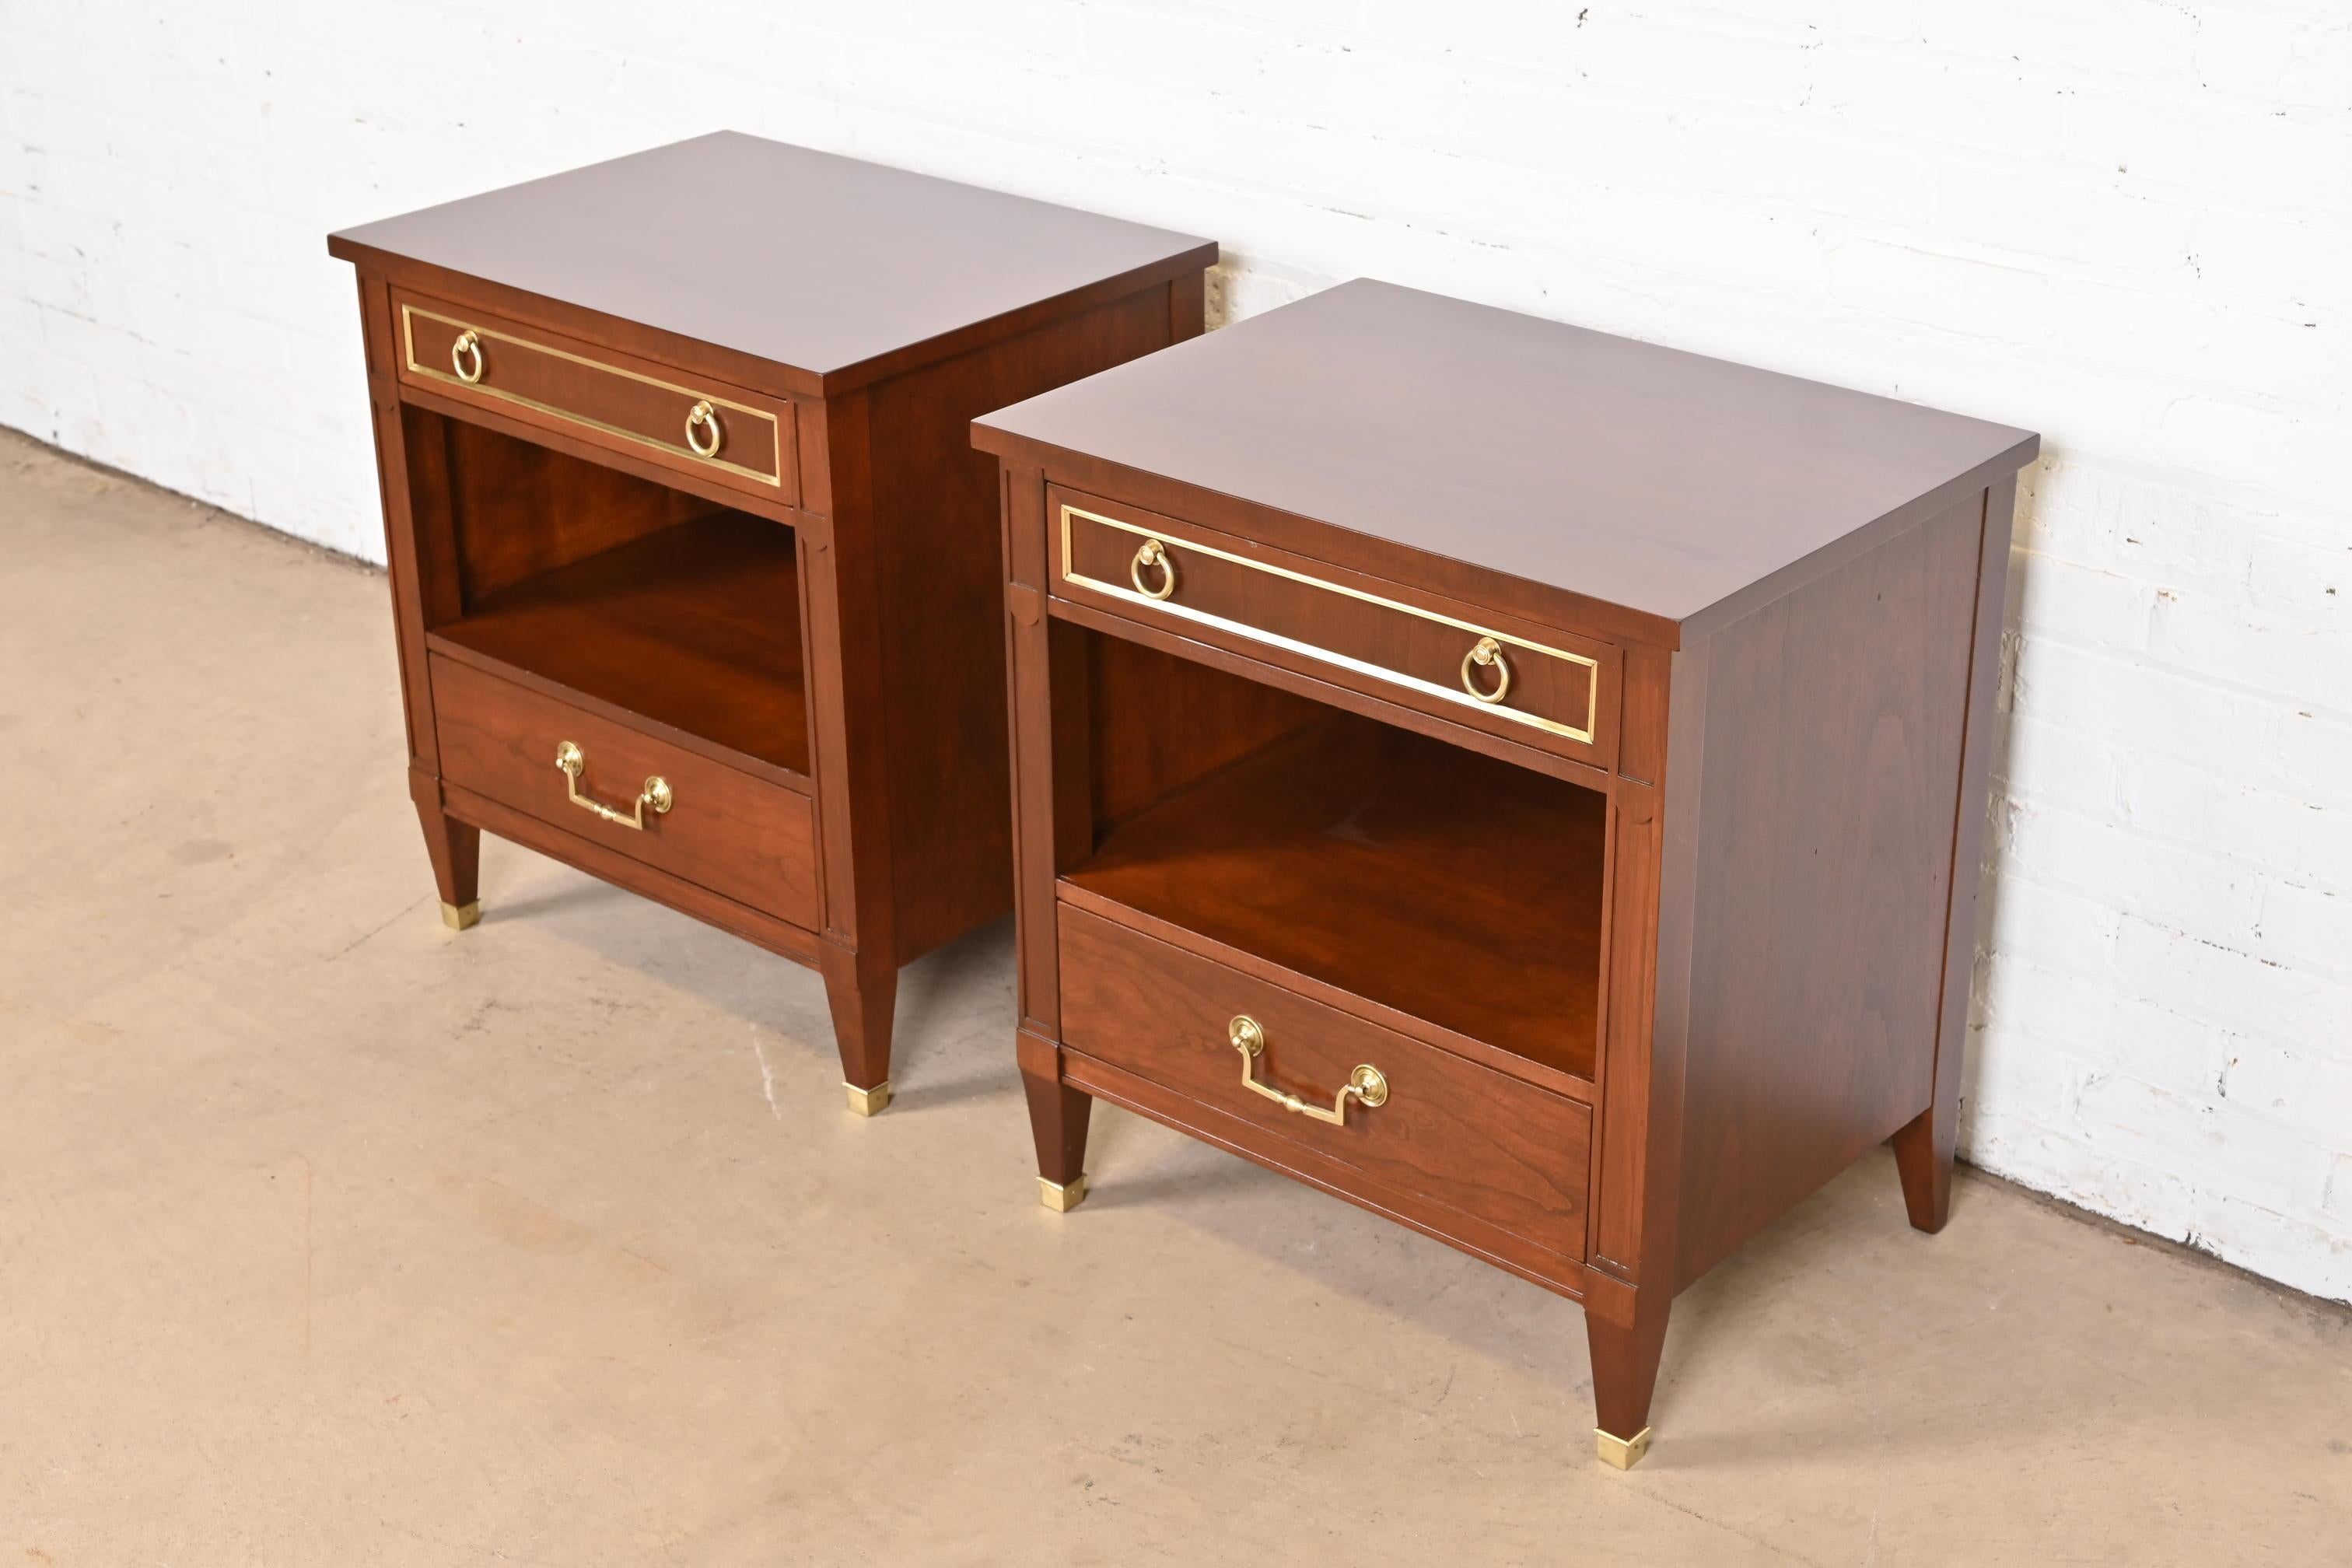 Kindel Furniture French Regency Louis XVI Cherry and Brass Nightstands, Pair In Good Condition For Sale In South Bend, IN